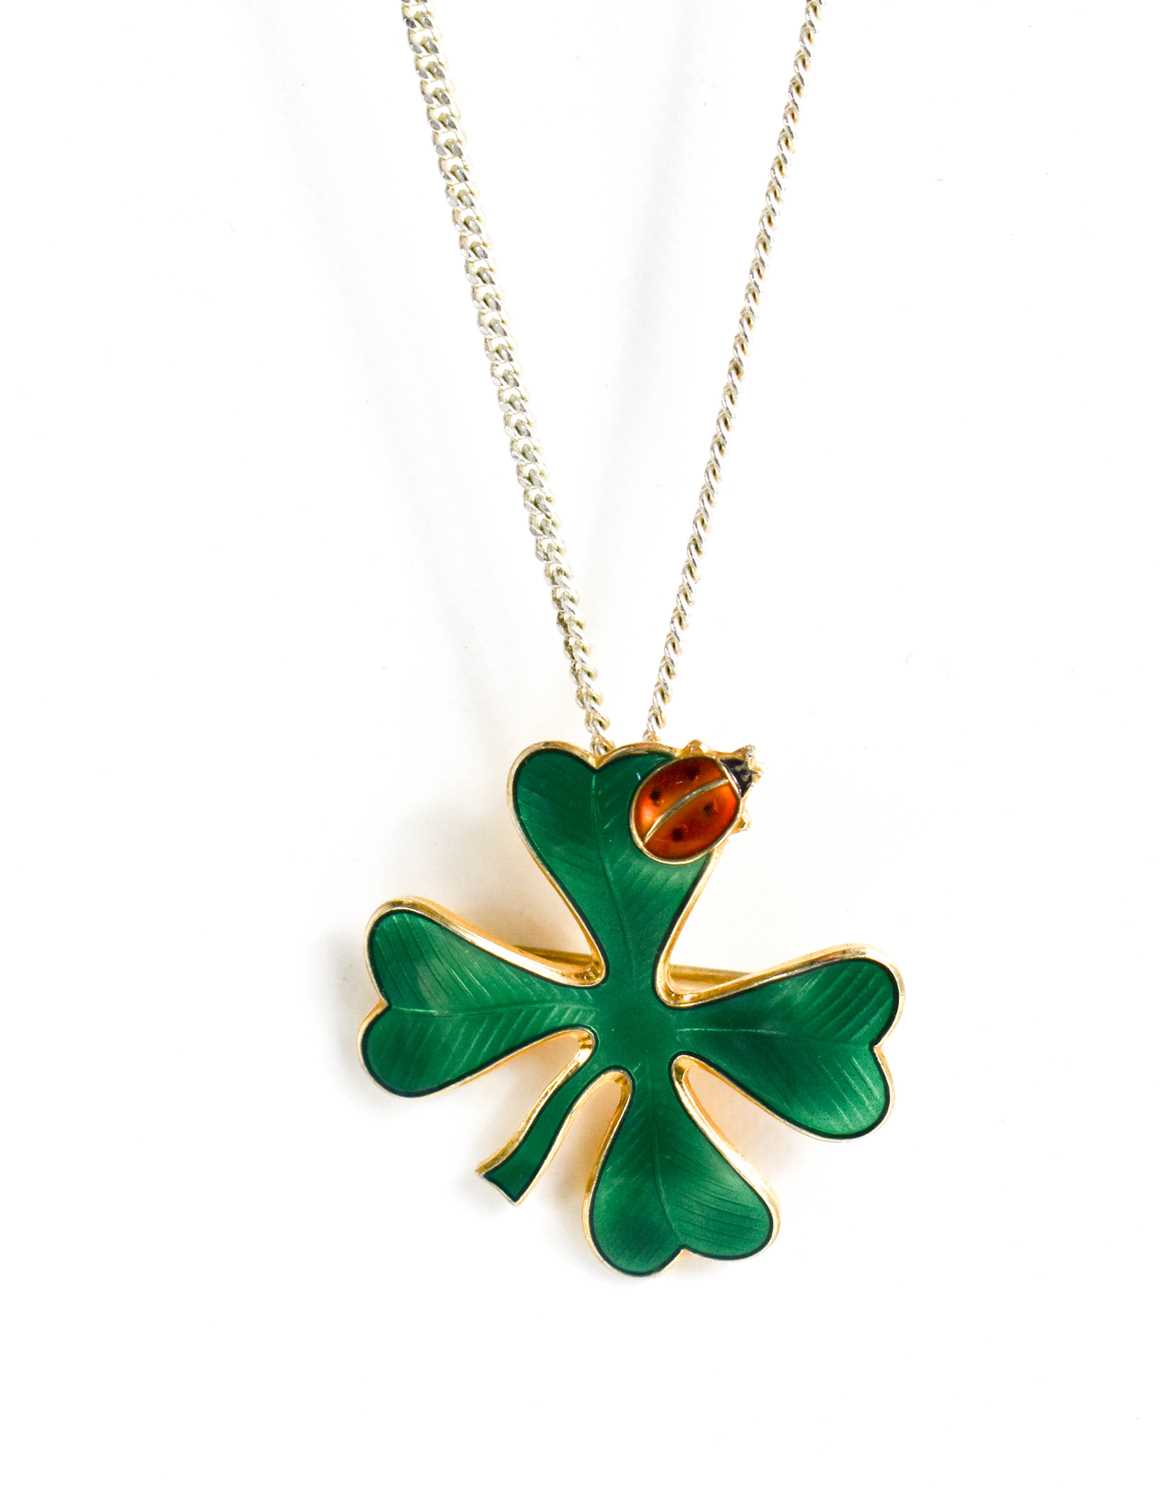 A David Andersen of Norway silver and enamel pendant necklace / brooch in the form of a four leaf